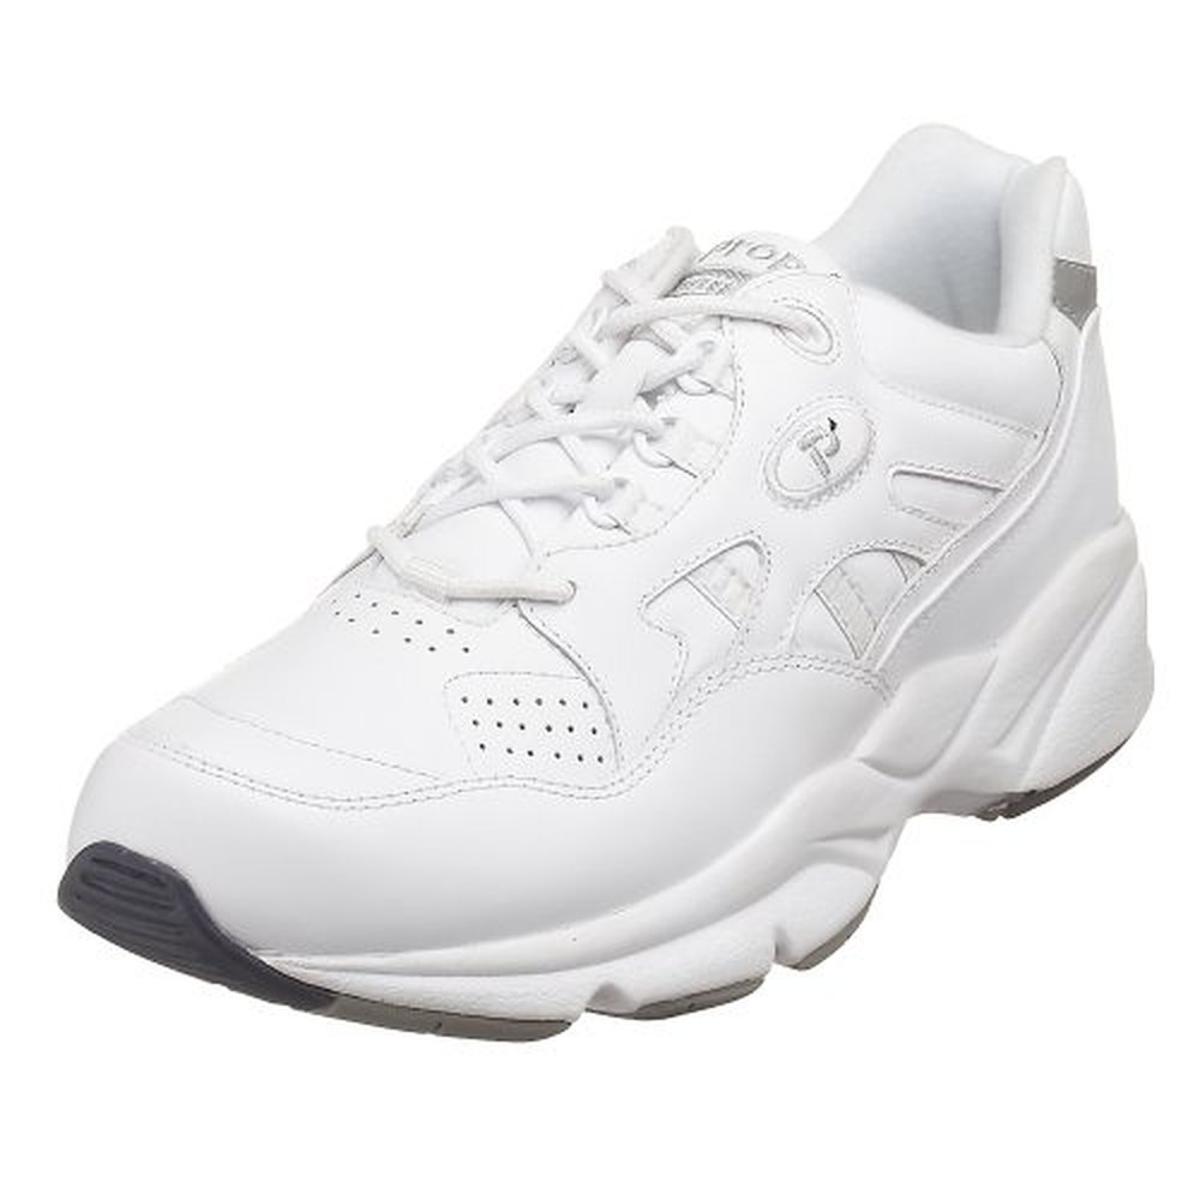 Propet Mens Stability White Walking Shoes 11 Extra Wide (E+, WW) BHFO ...